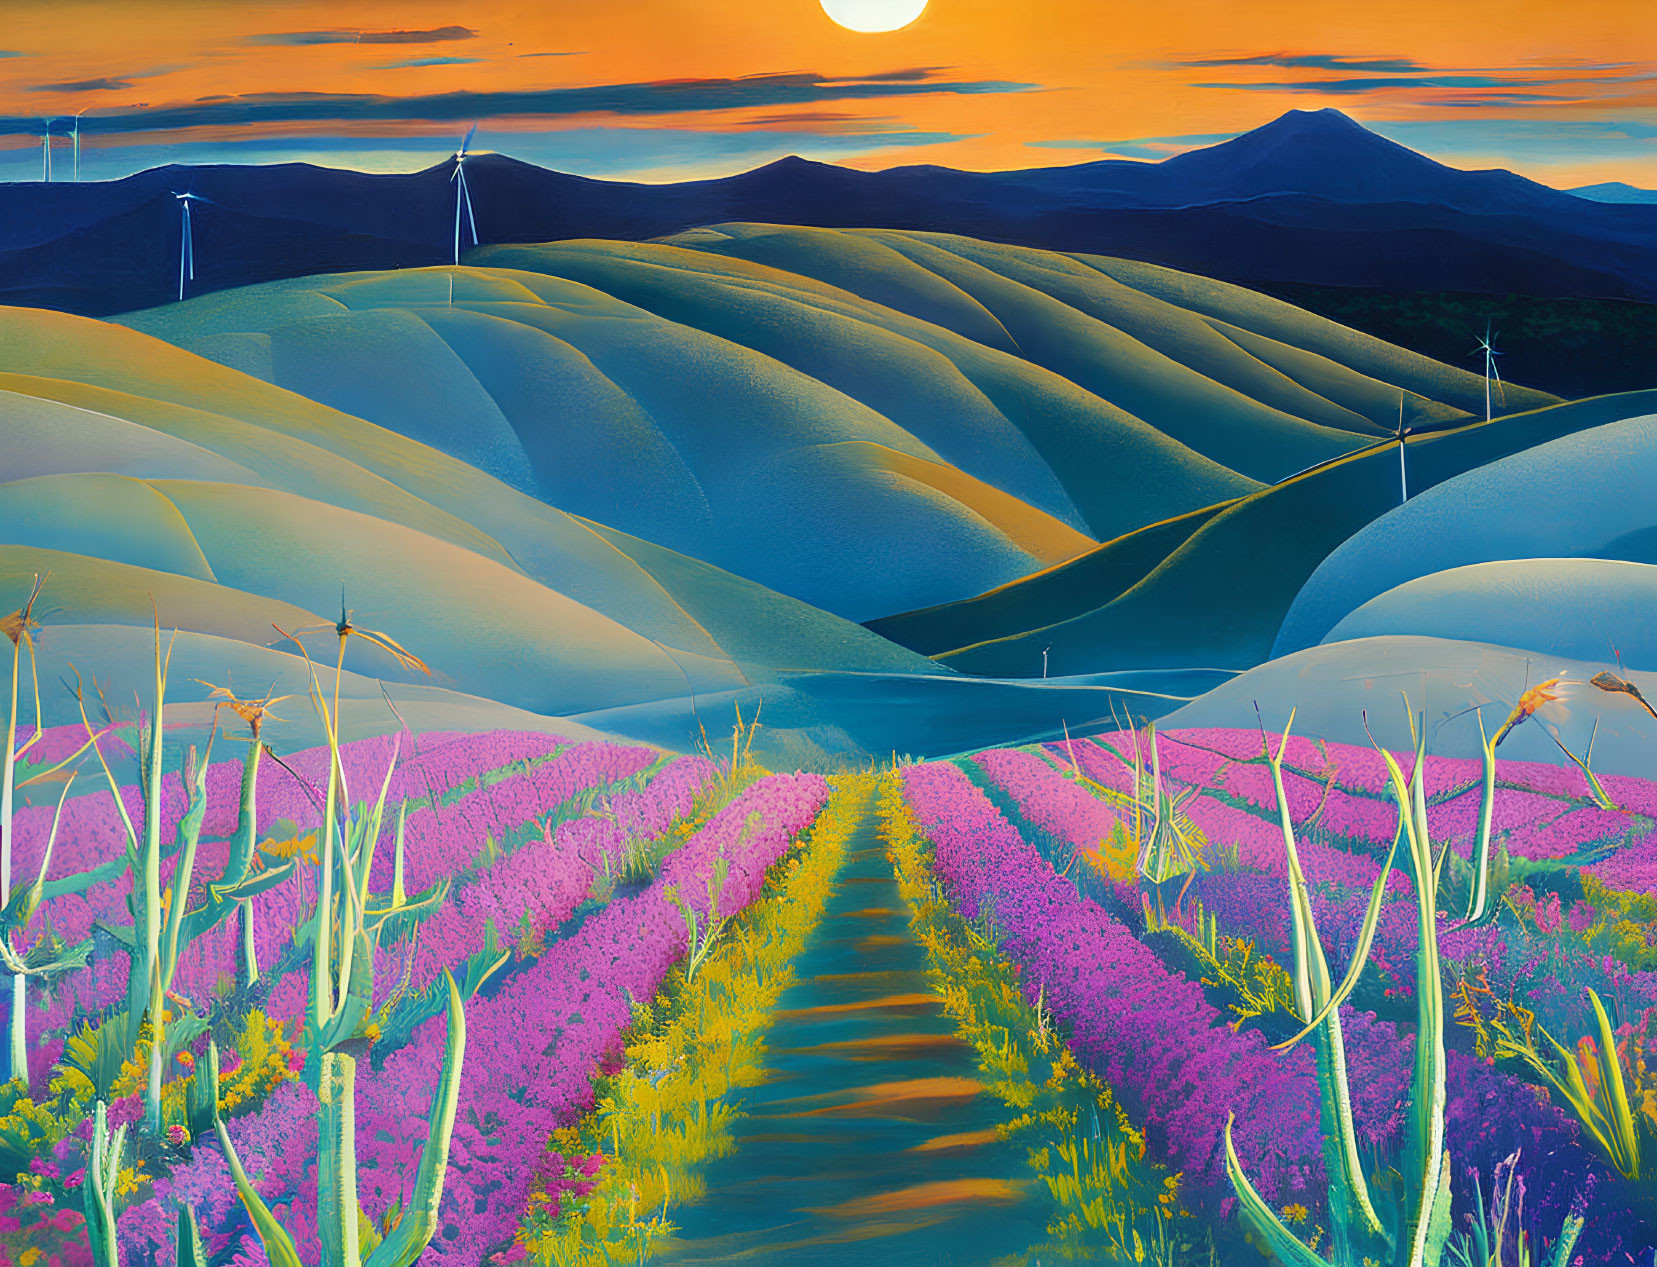 Vibrant sunset painting with hills, flowers, and wind turbines